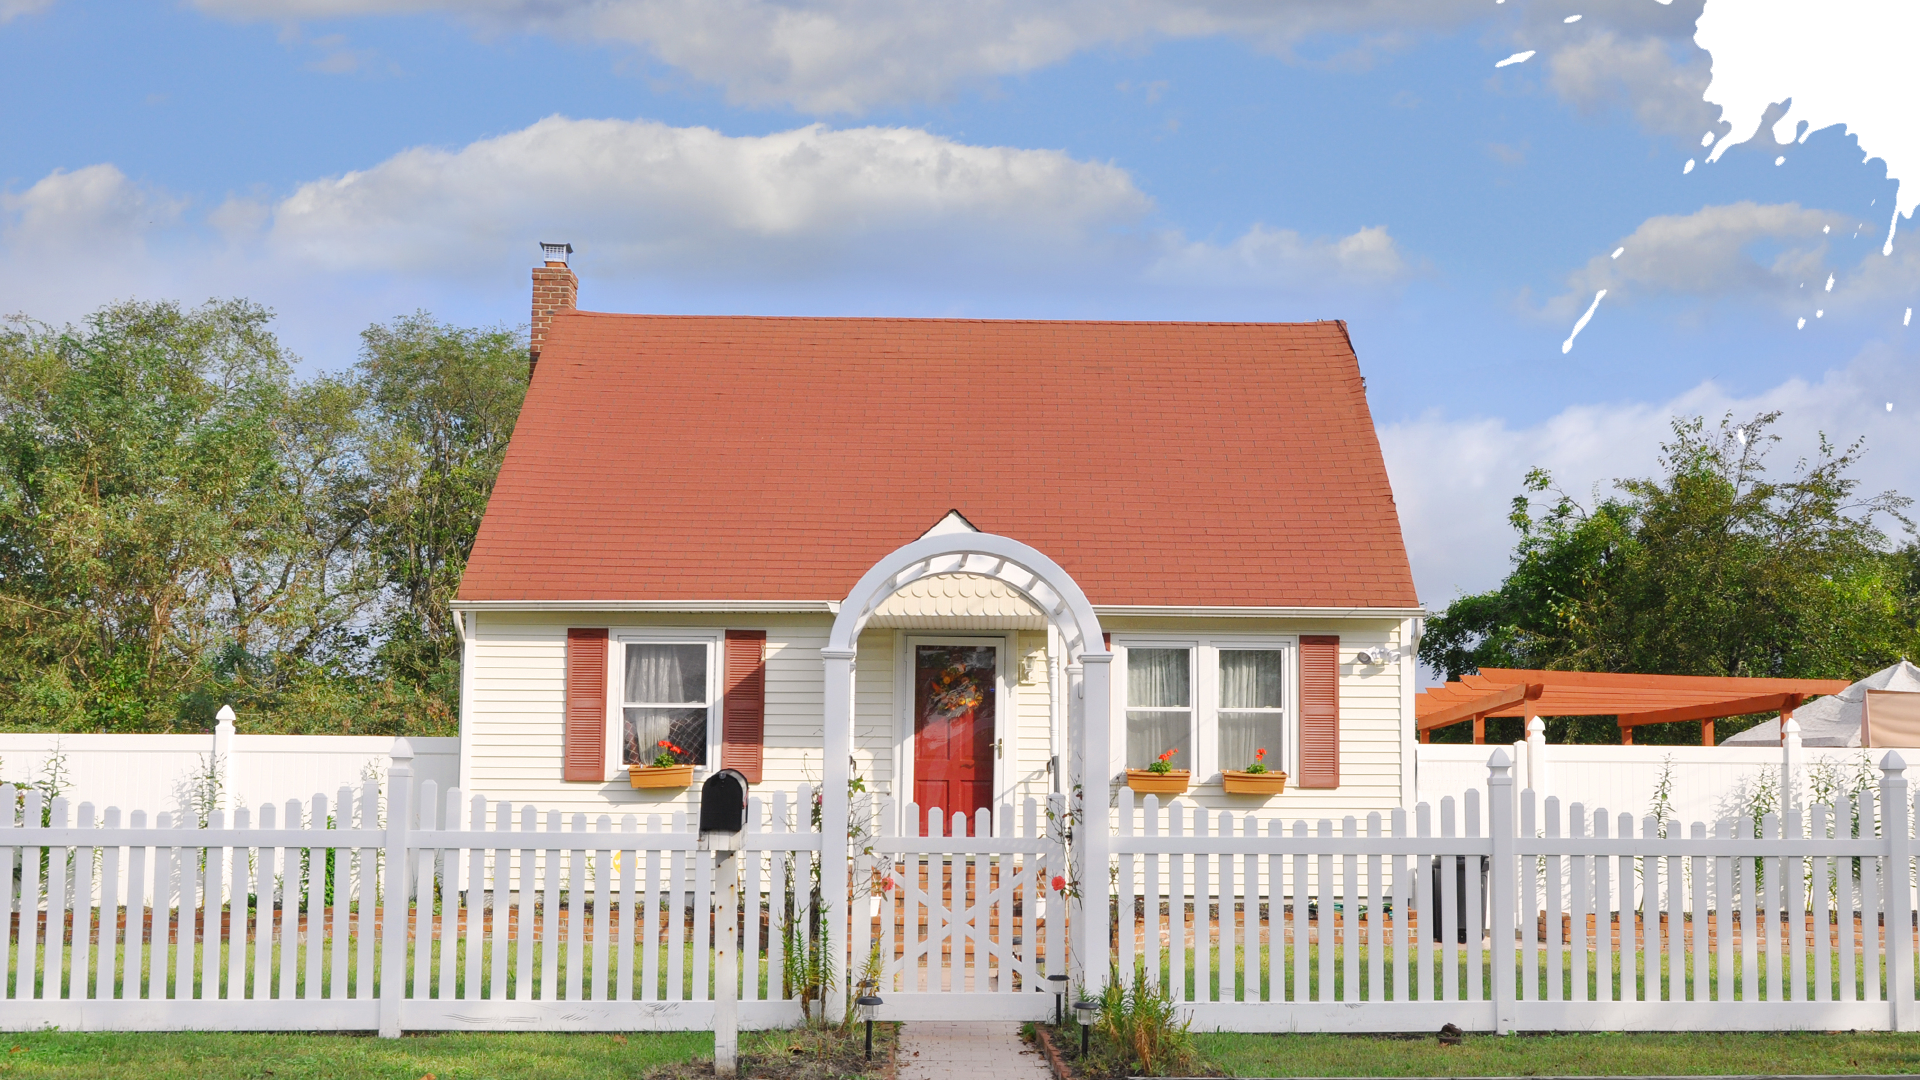 Picturesque suburban house with white picket fence